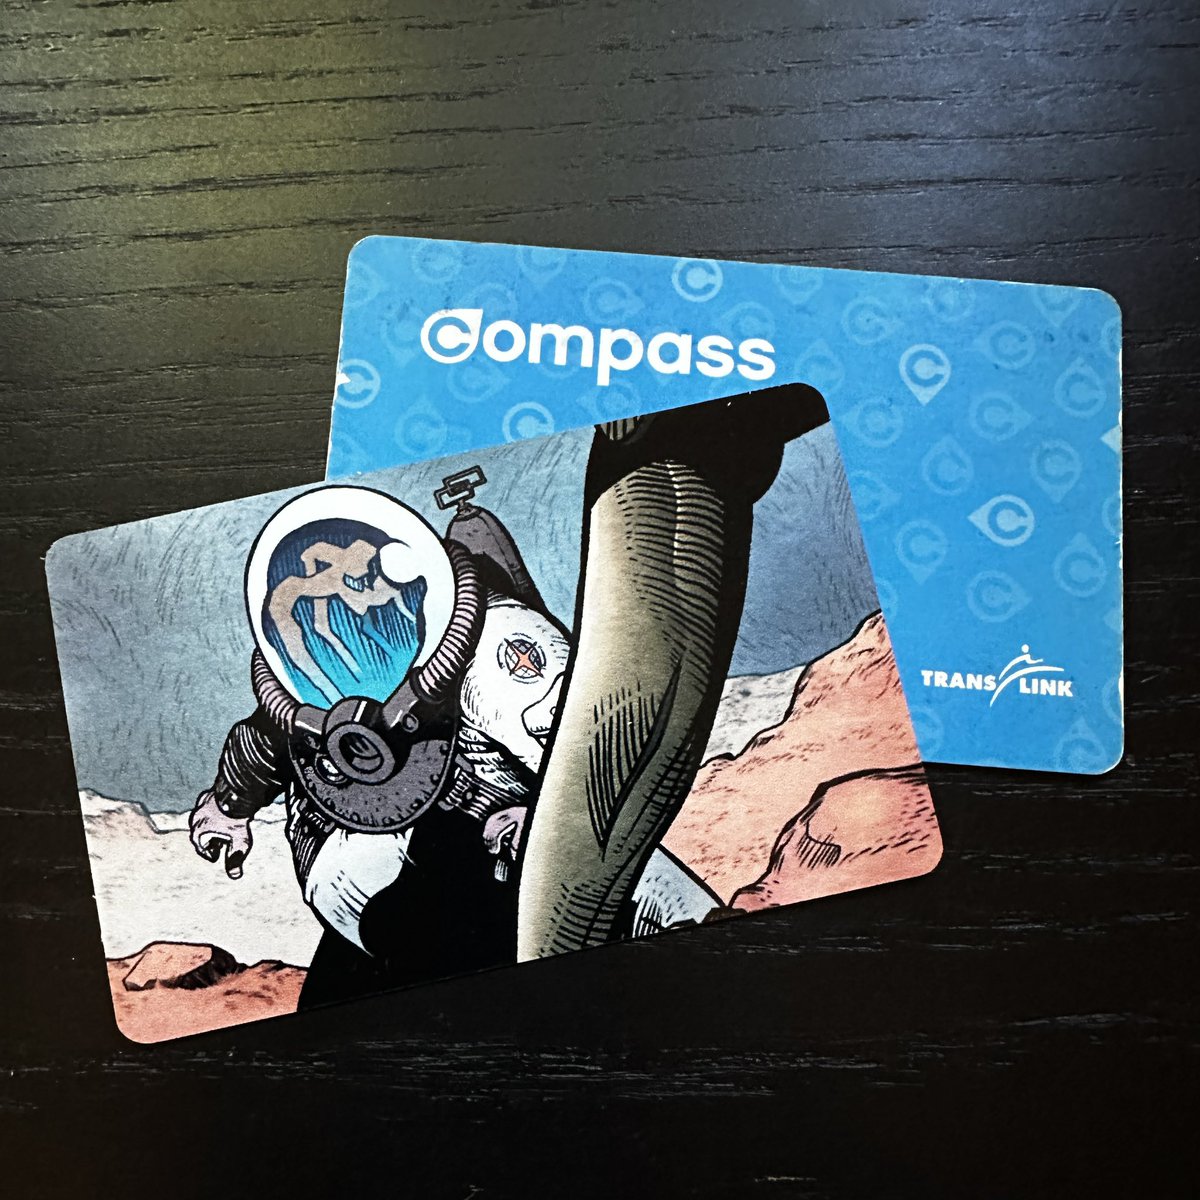 OK, my #CompassCard just got way cooler! Thanks @dReaderApp for the prize! So cool having my own comic on my transit pass. #cucucovers #tlss #thelumpsumsaga